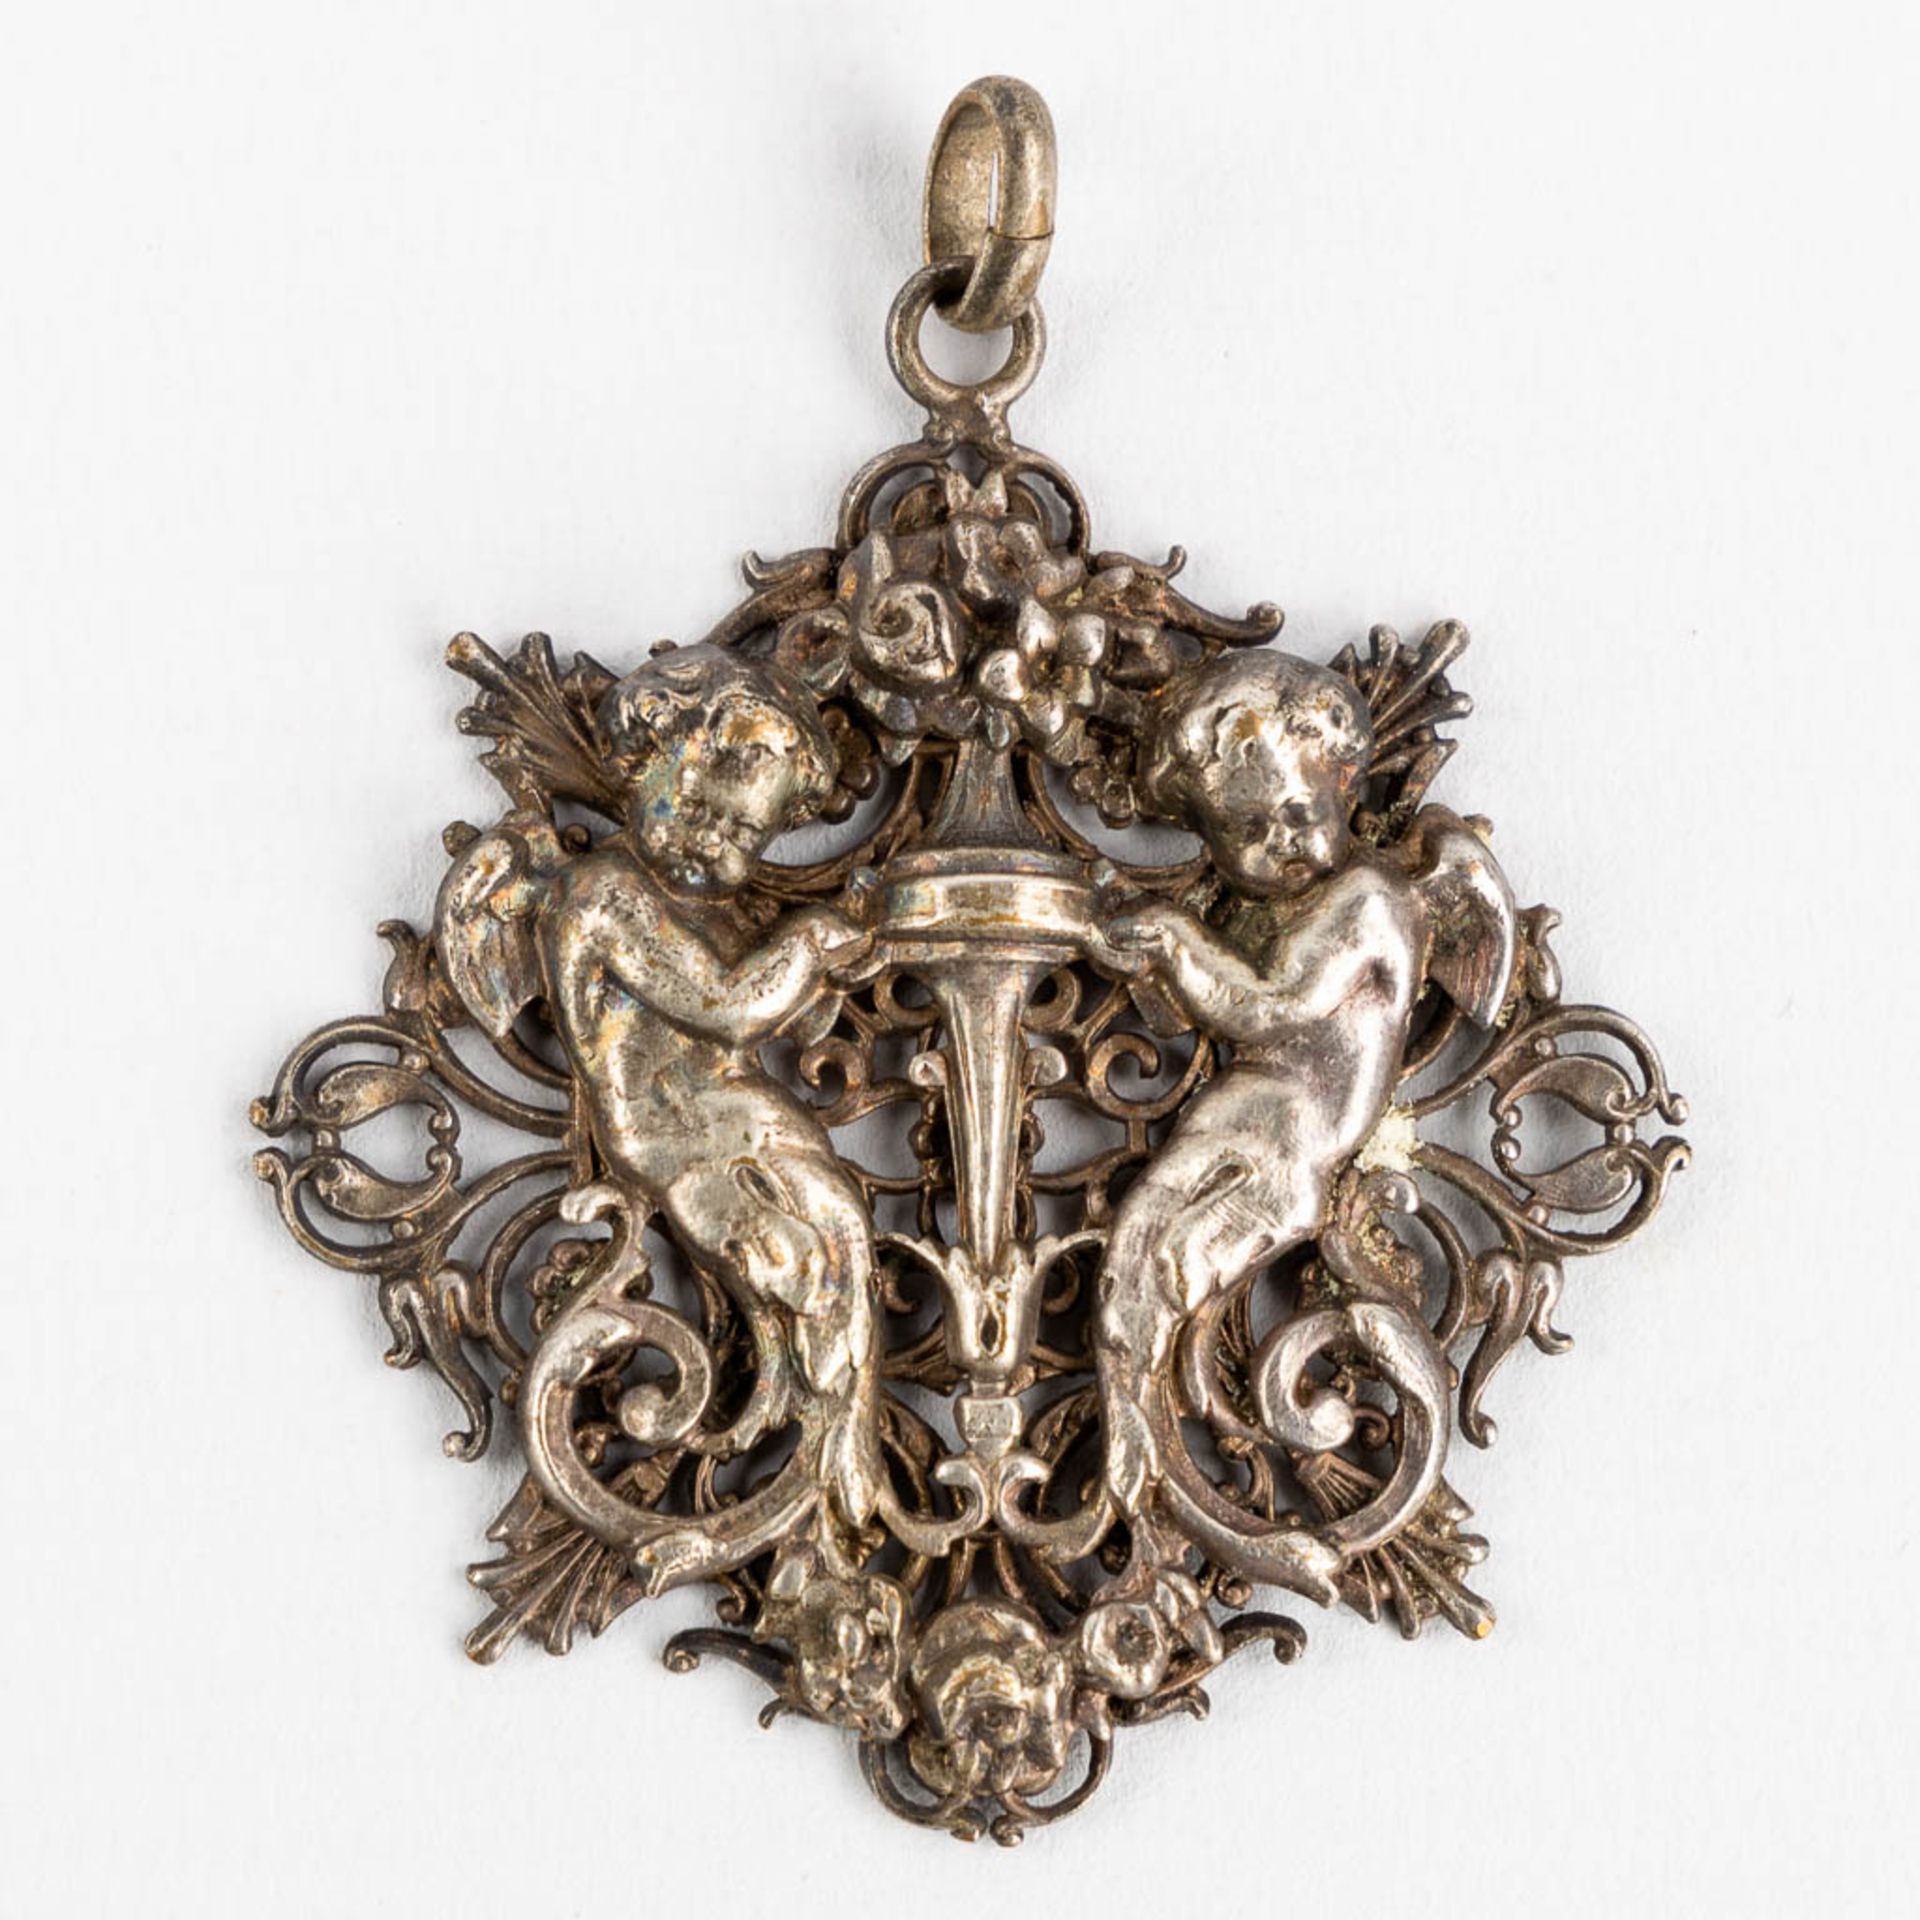 A collection of silver brooches, pendants and bracelets, Filigrane silver. 90g. (H:7 cm) - Image 6 of 8